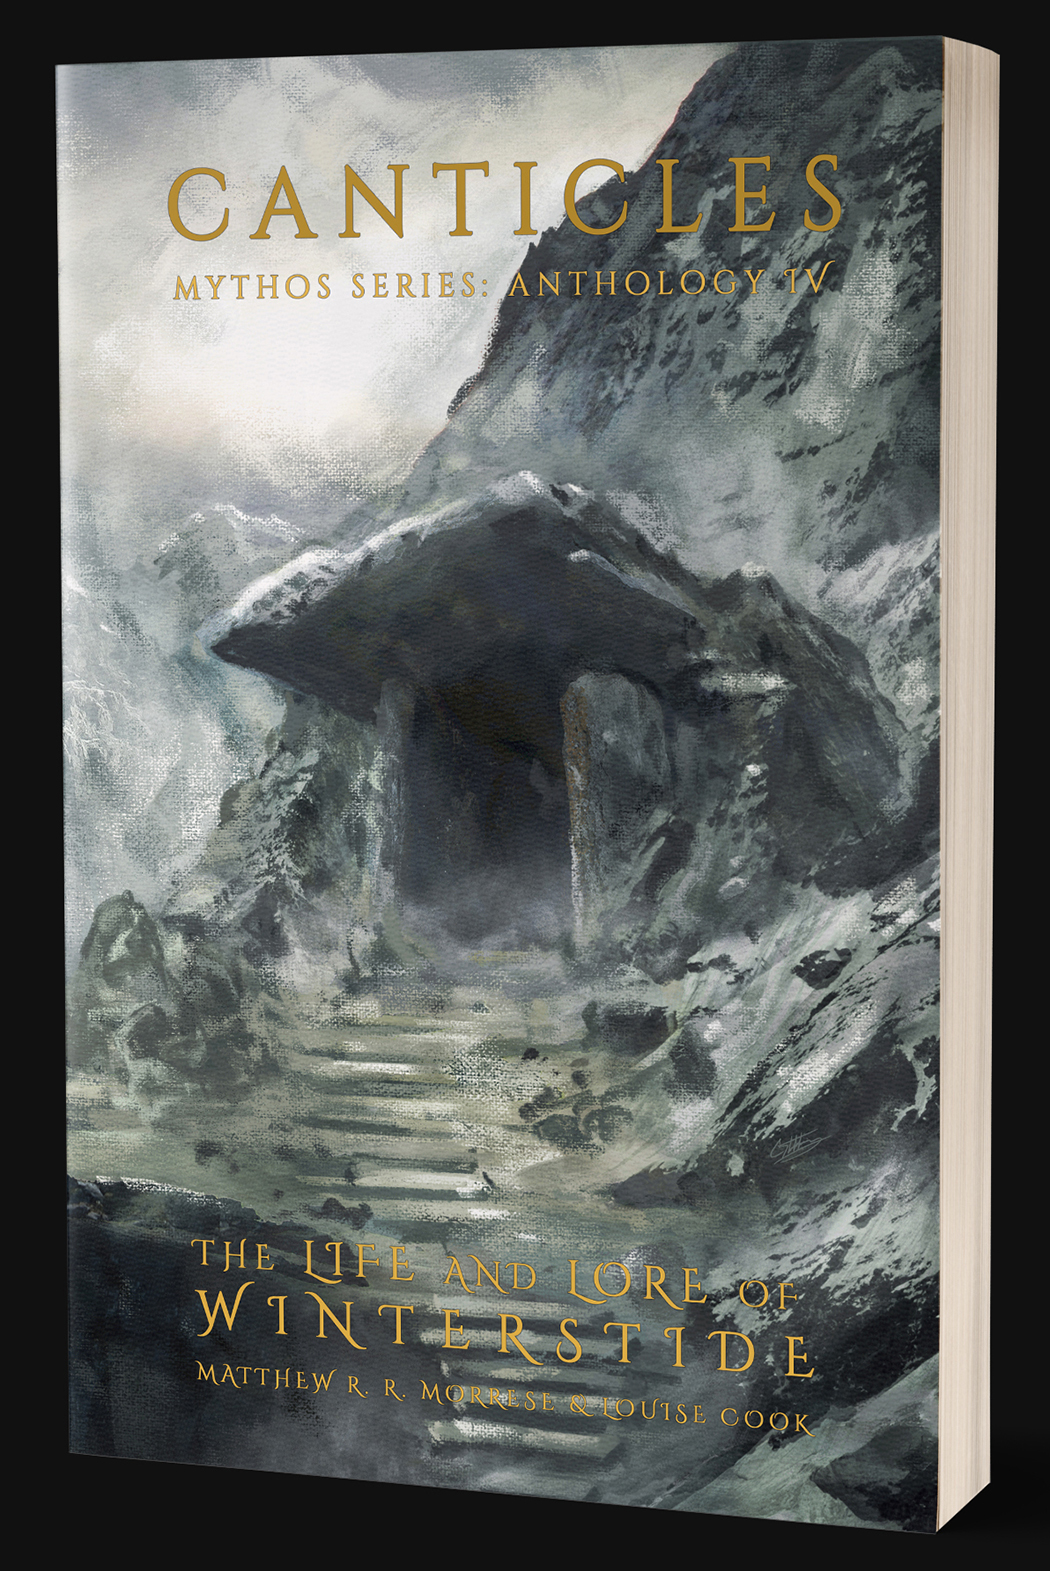 FREE: THE LIFE AND LORE OF WINTERSTIDE by Matthew RR Morrese